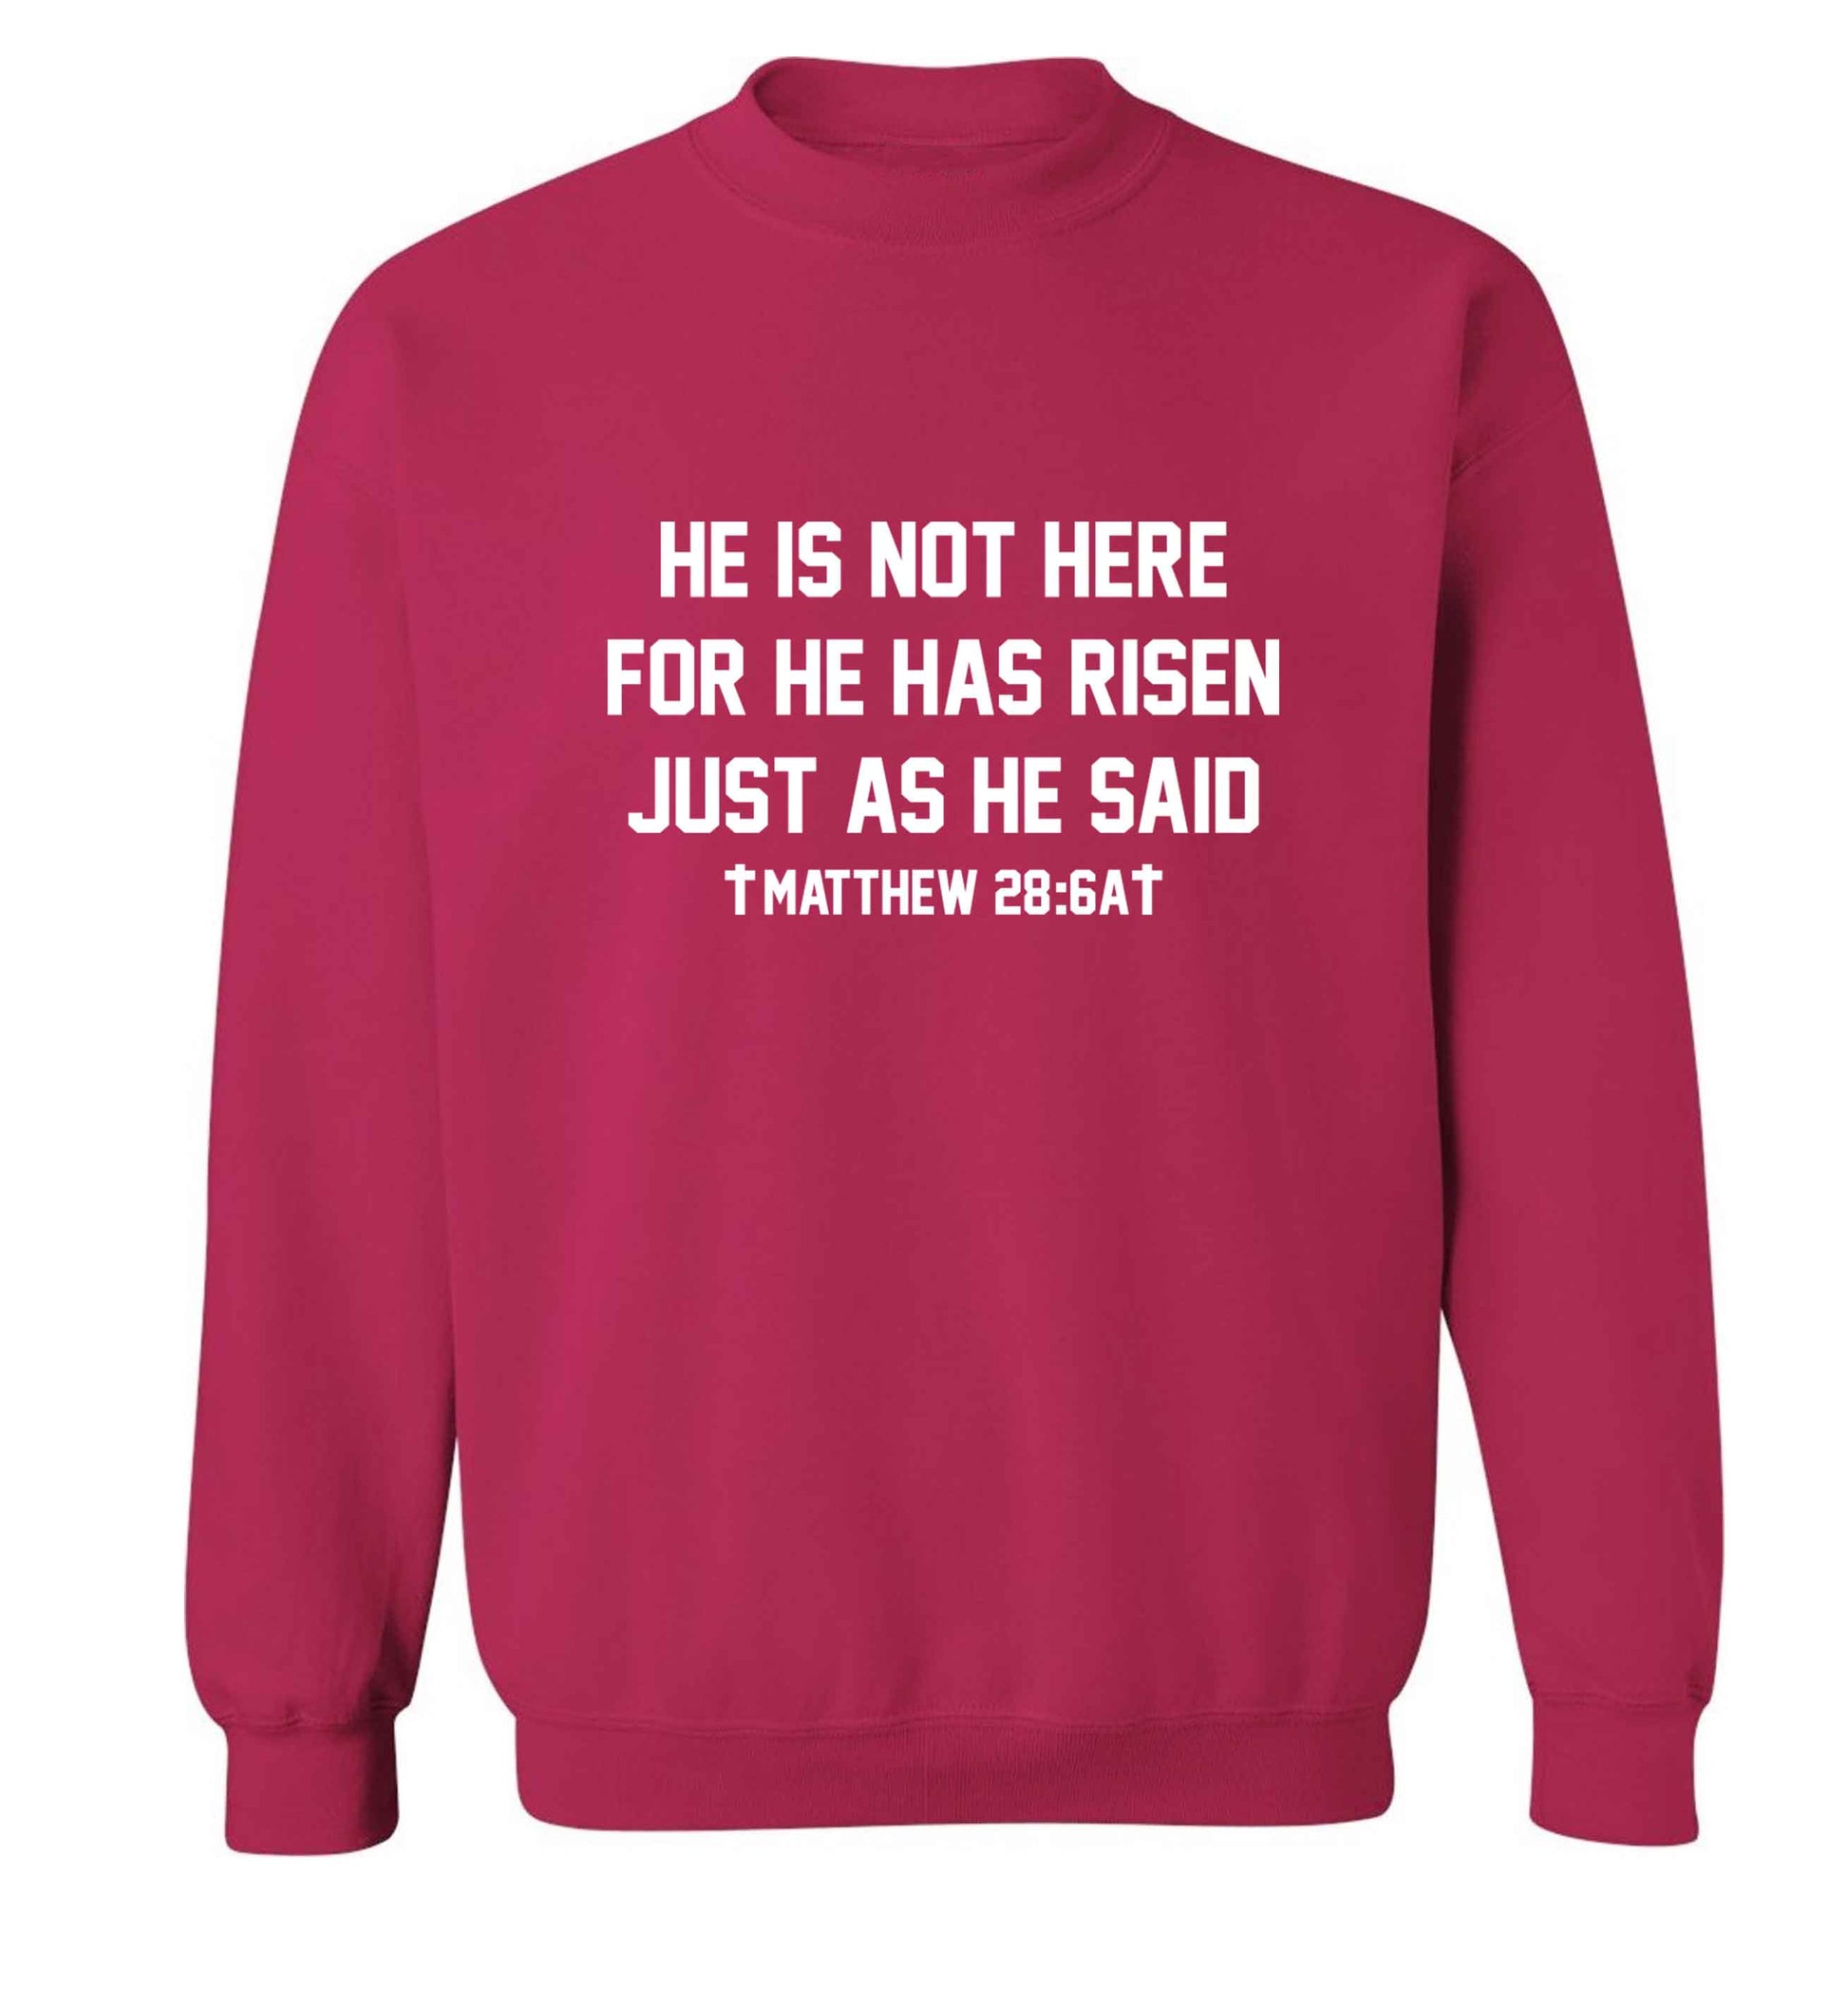 He is not here for he has risen just as he said matthew 28:6A adult's unisex pink sweater 2XL